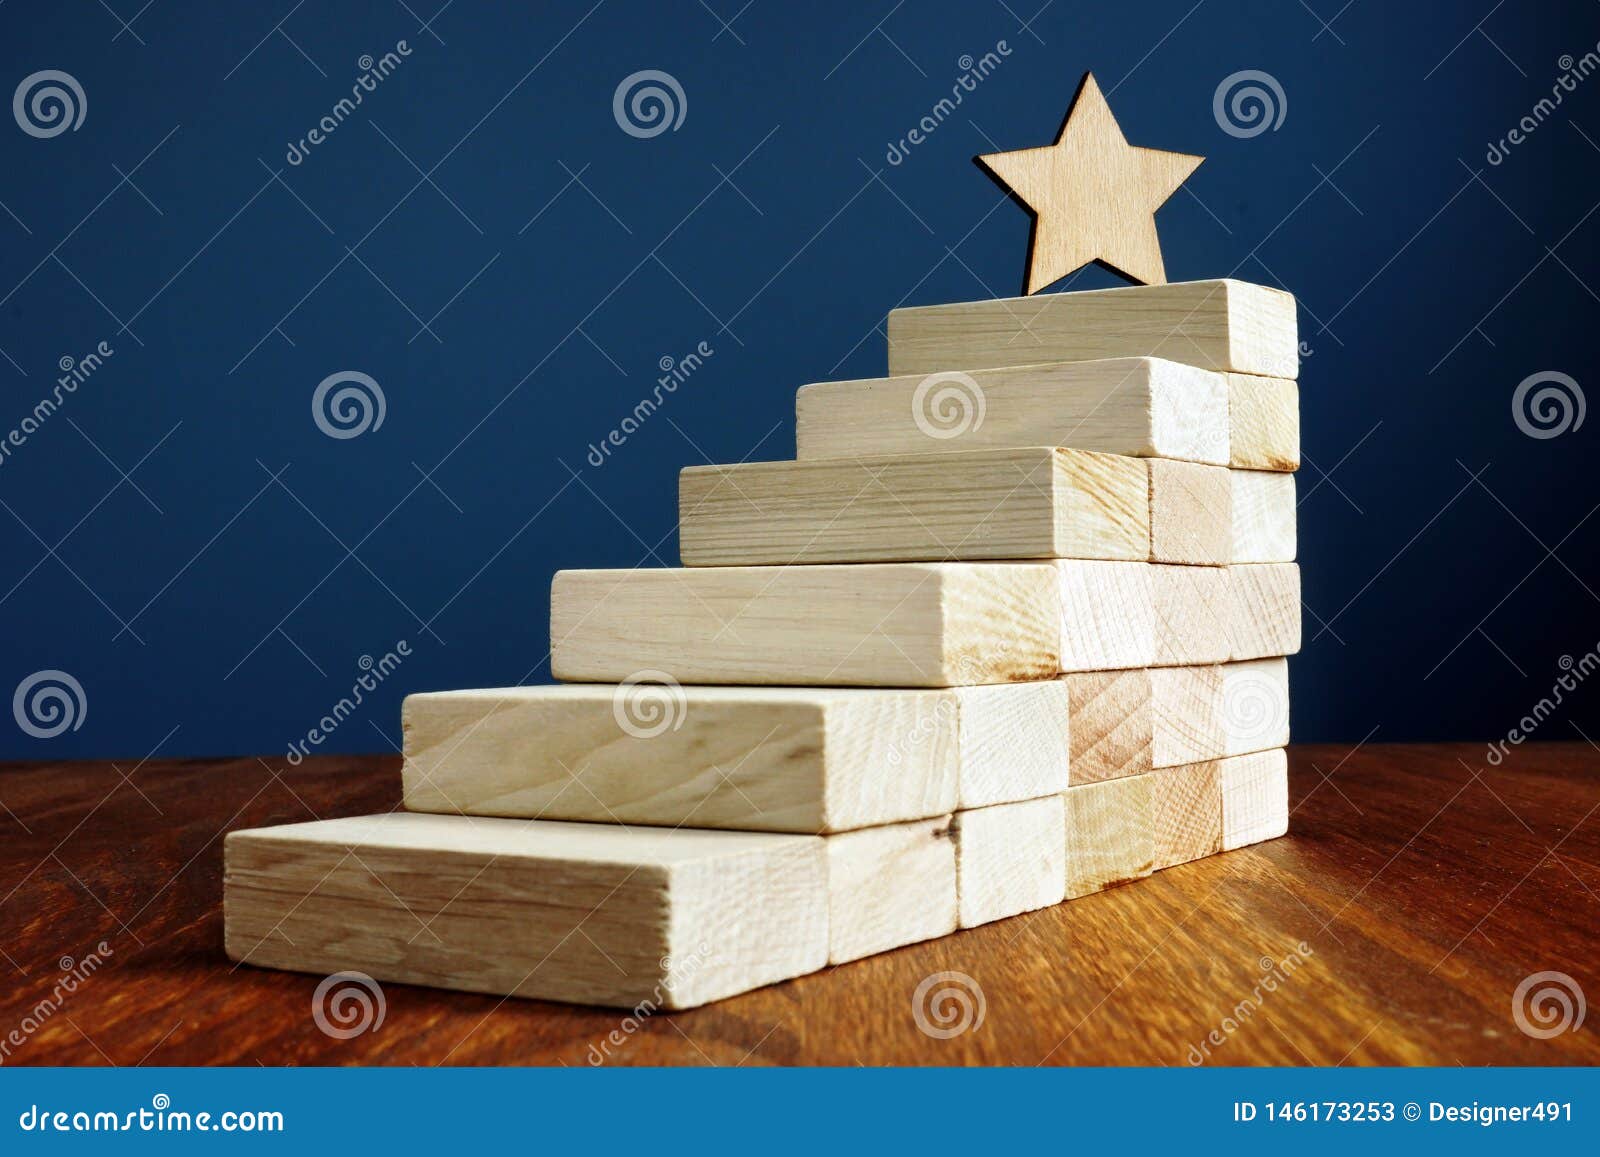 goal setting and achievement. star and stairs from wood